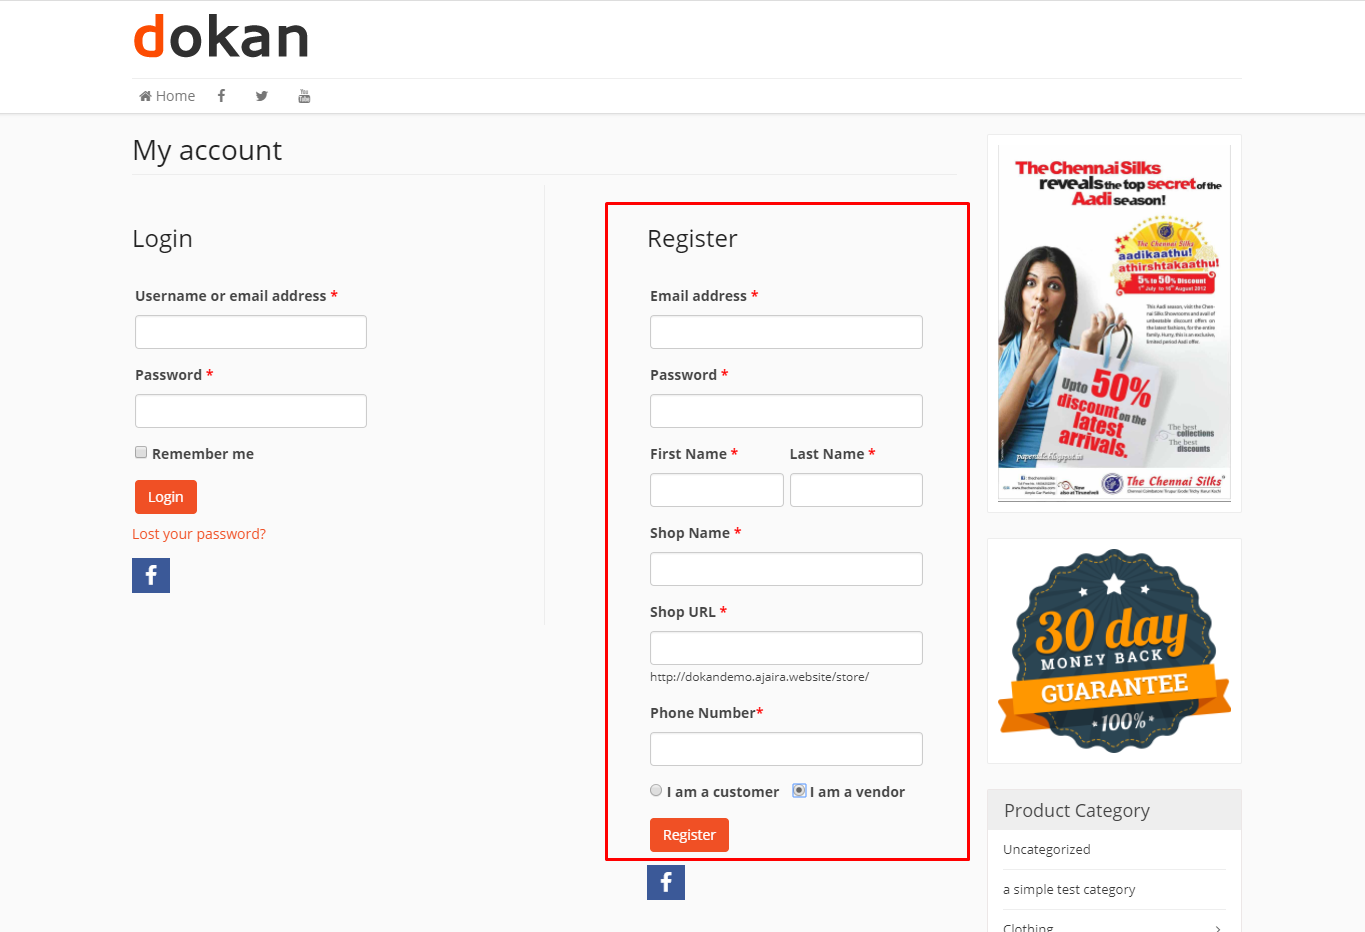 This is a screenshot of the dokan registration form